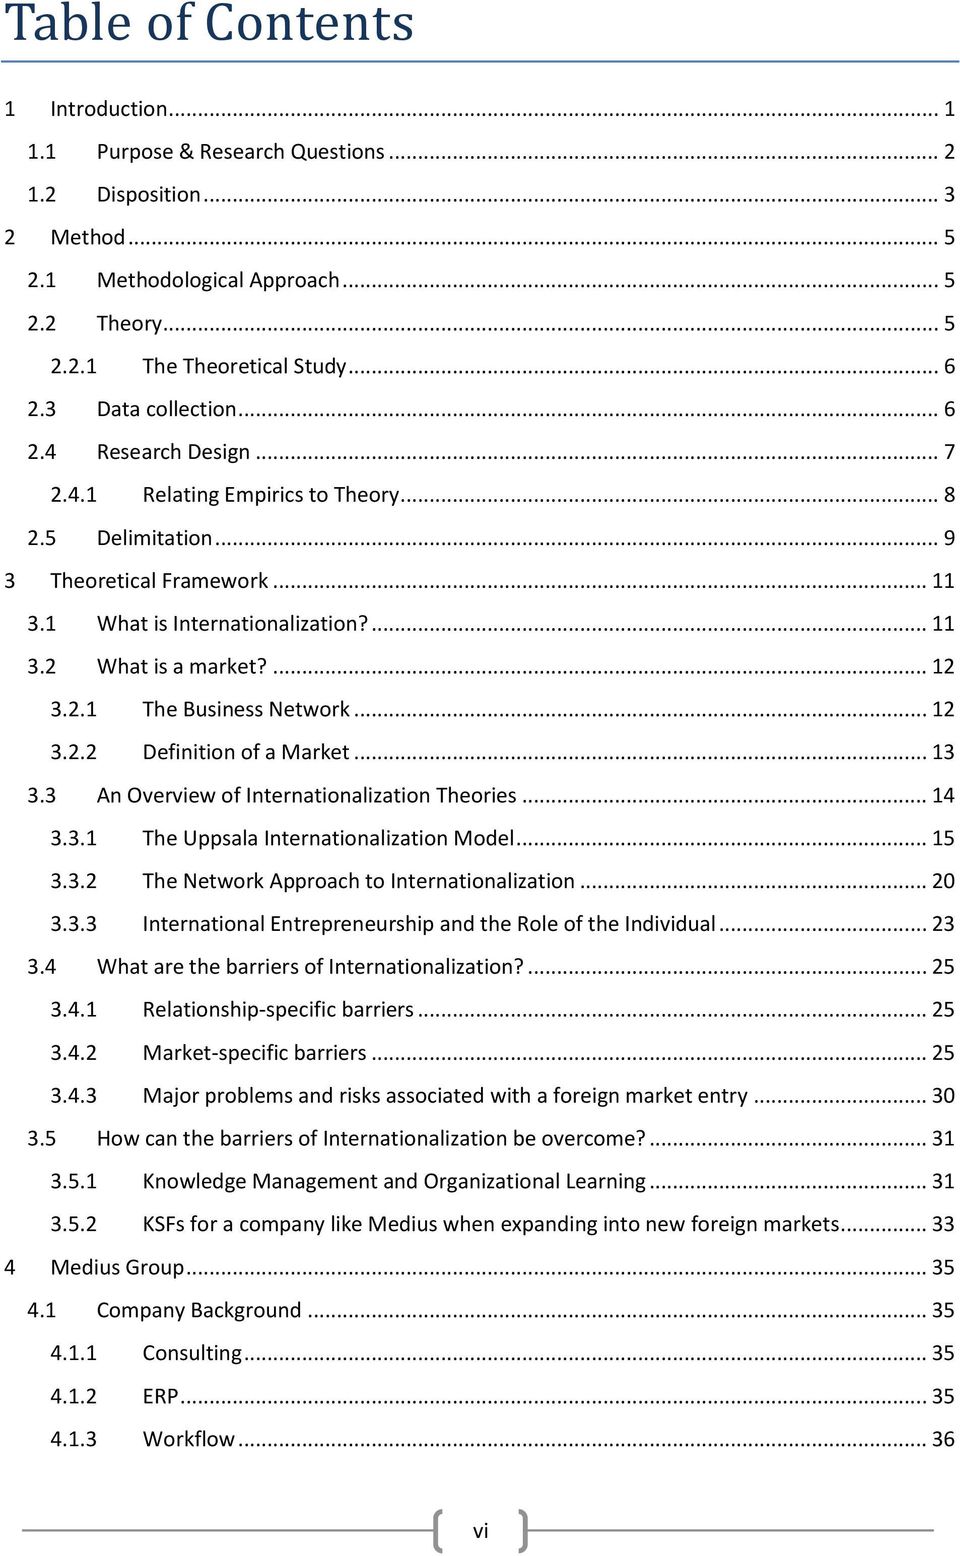 ... 12 3.2.1 The Business Network... 12 3.2.2 Definition of a Market... 13 3.3 An Overview of Internationalization Theories... 14 3.3.1 The Uppsala Internationalization Model... 15 3.3.2 The Network Approach to Internationalization.